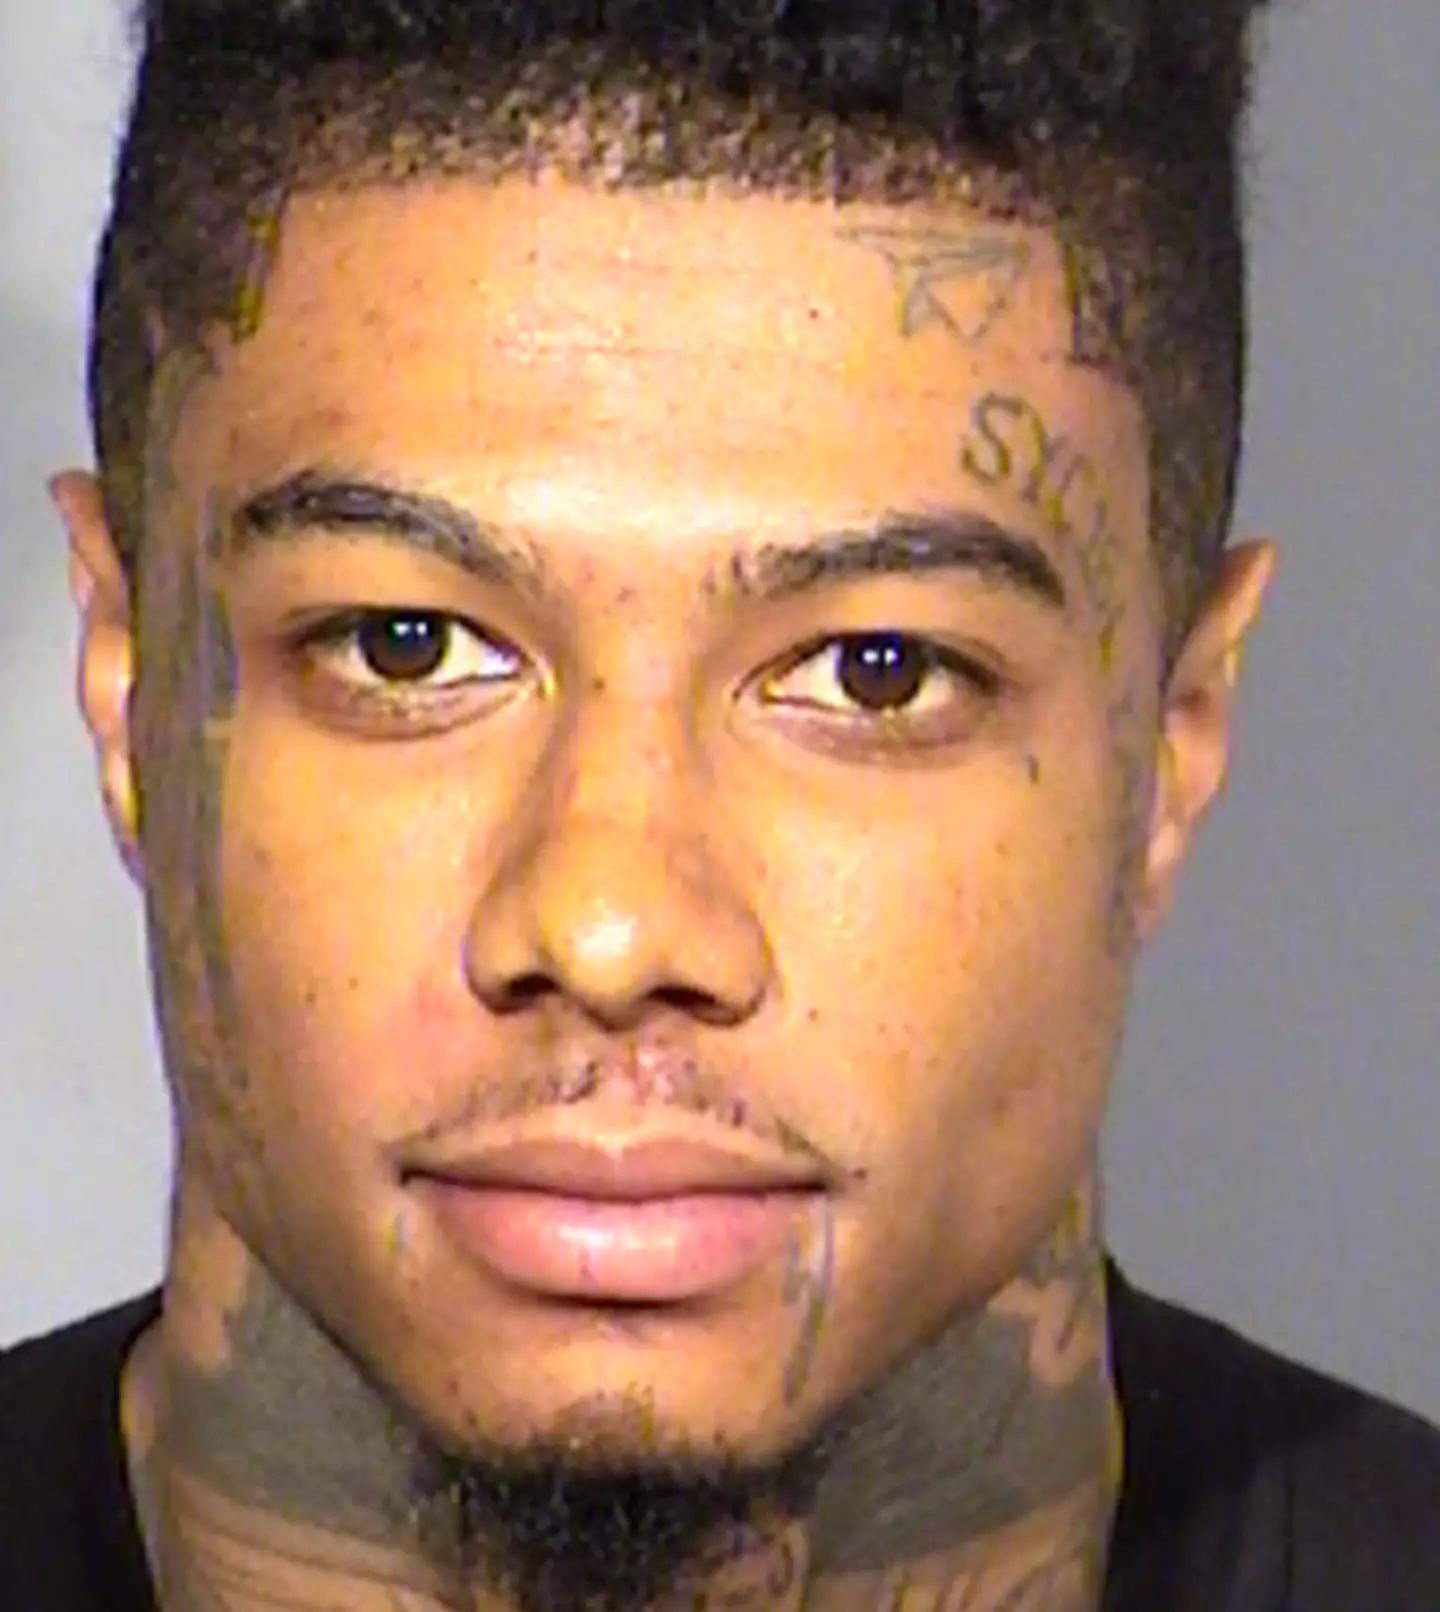 Blueface has been jailed for violating probation.